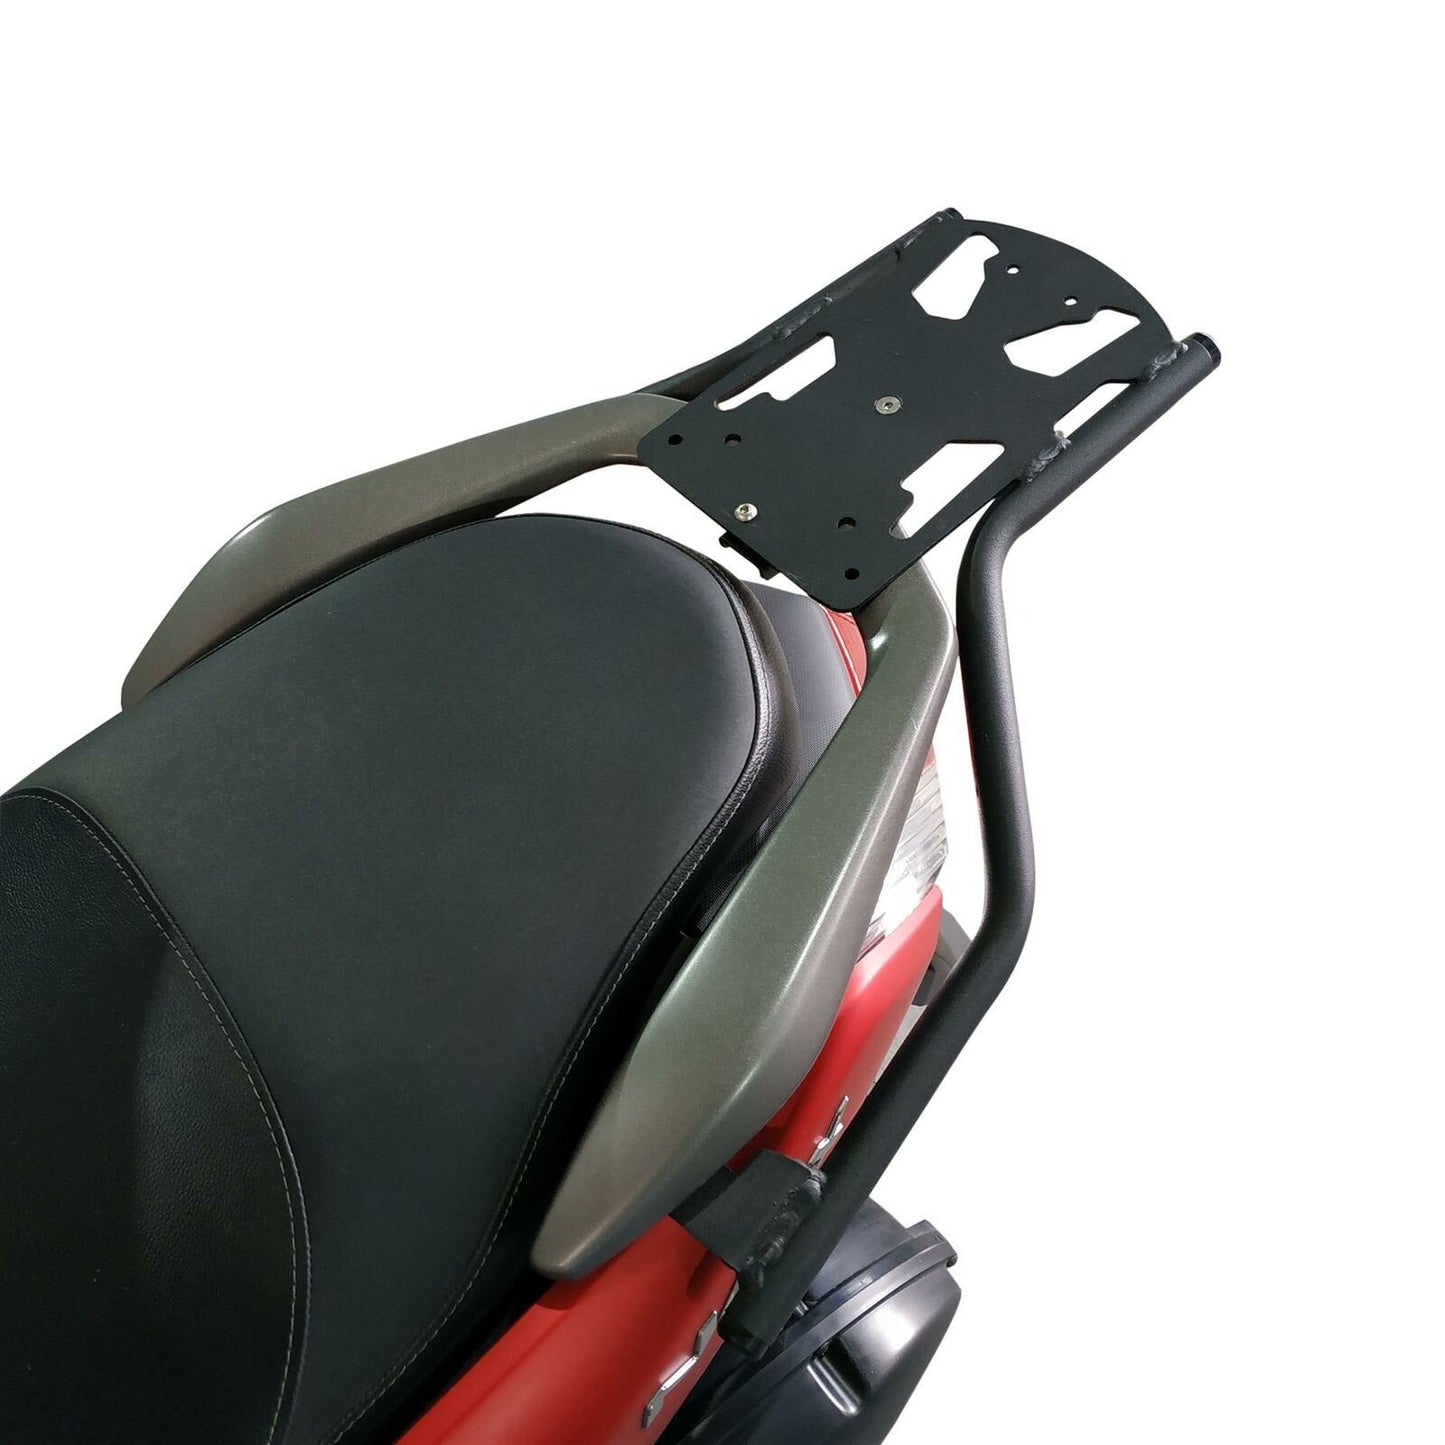 NMAX125 rear luggage rack 15-20 FITS ONLY BETWEEN 2015-20